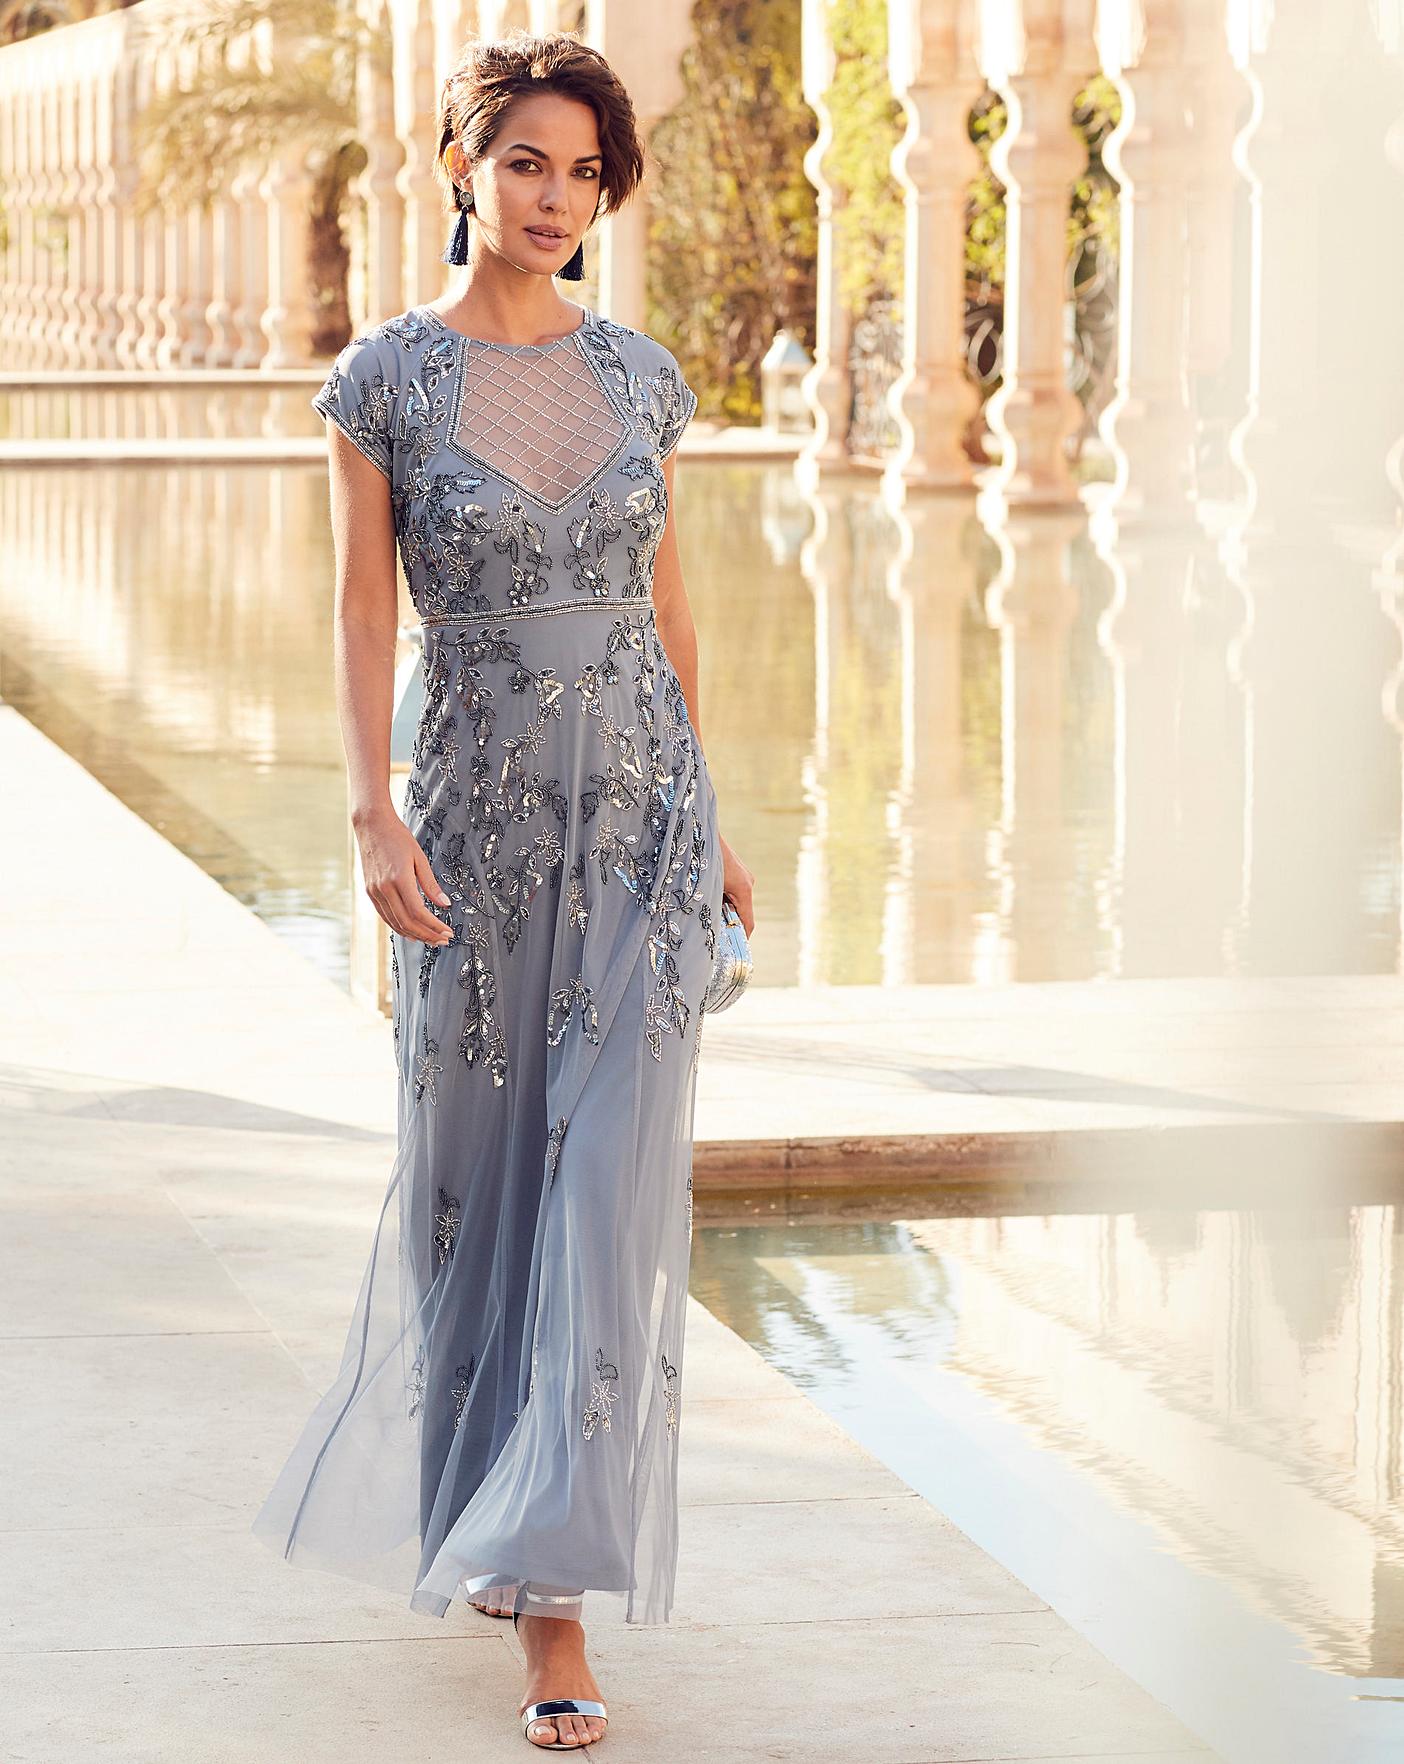 joanna hope evening gowns